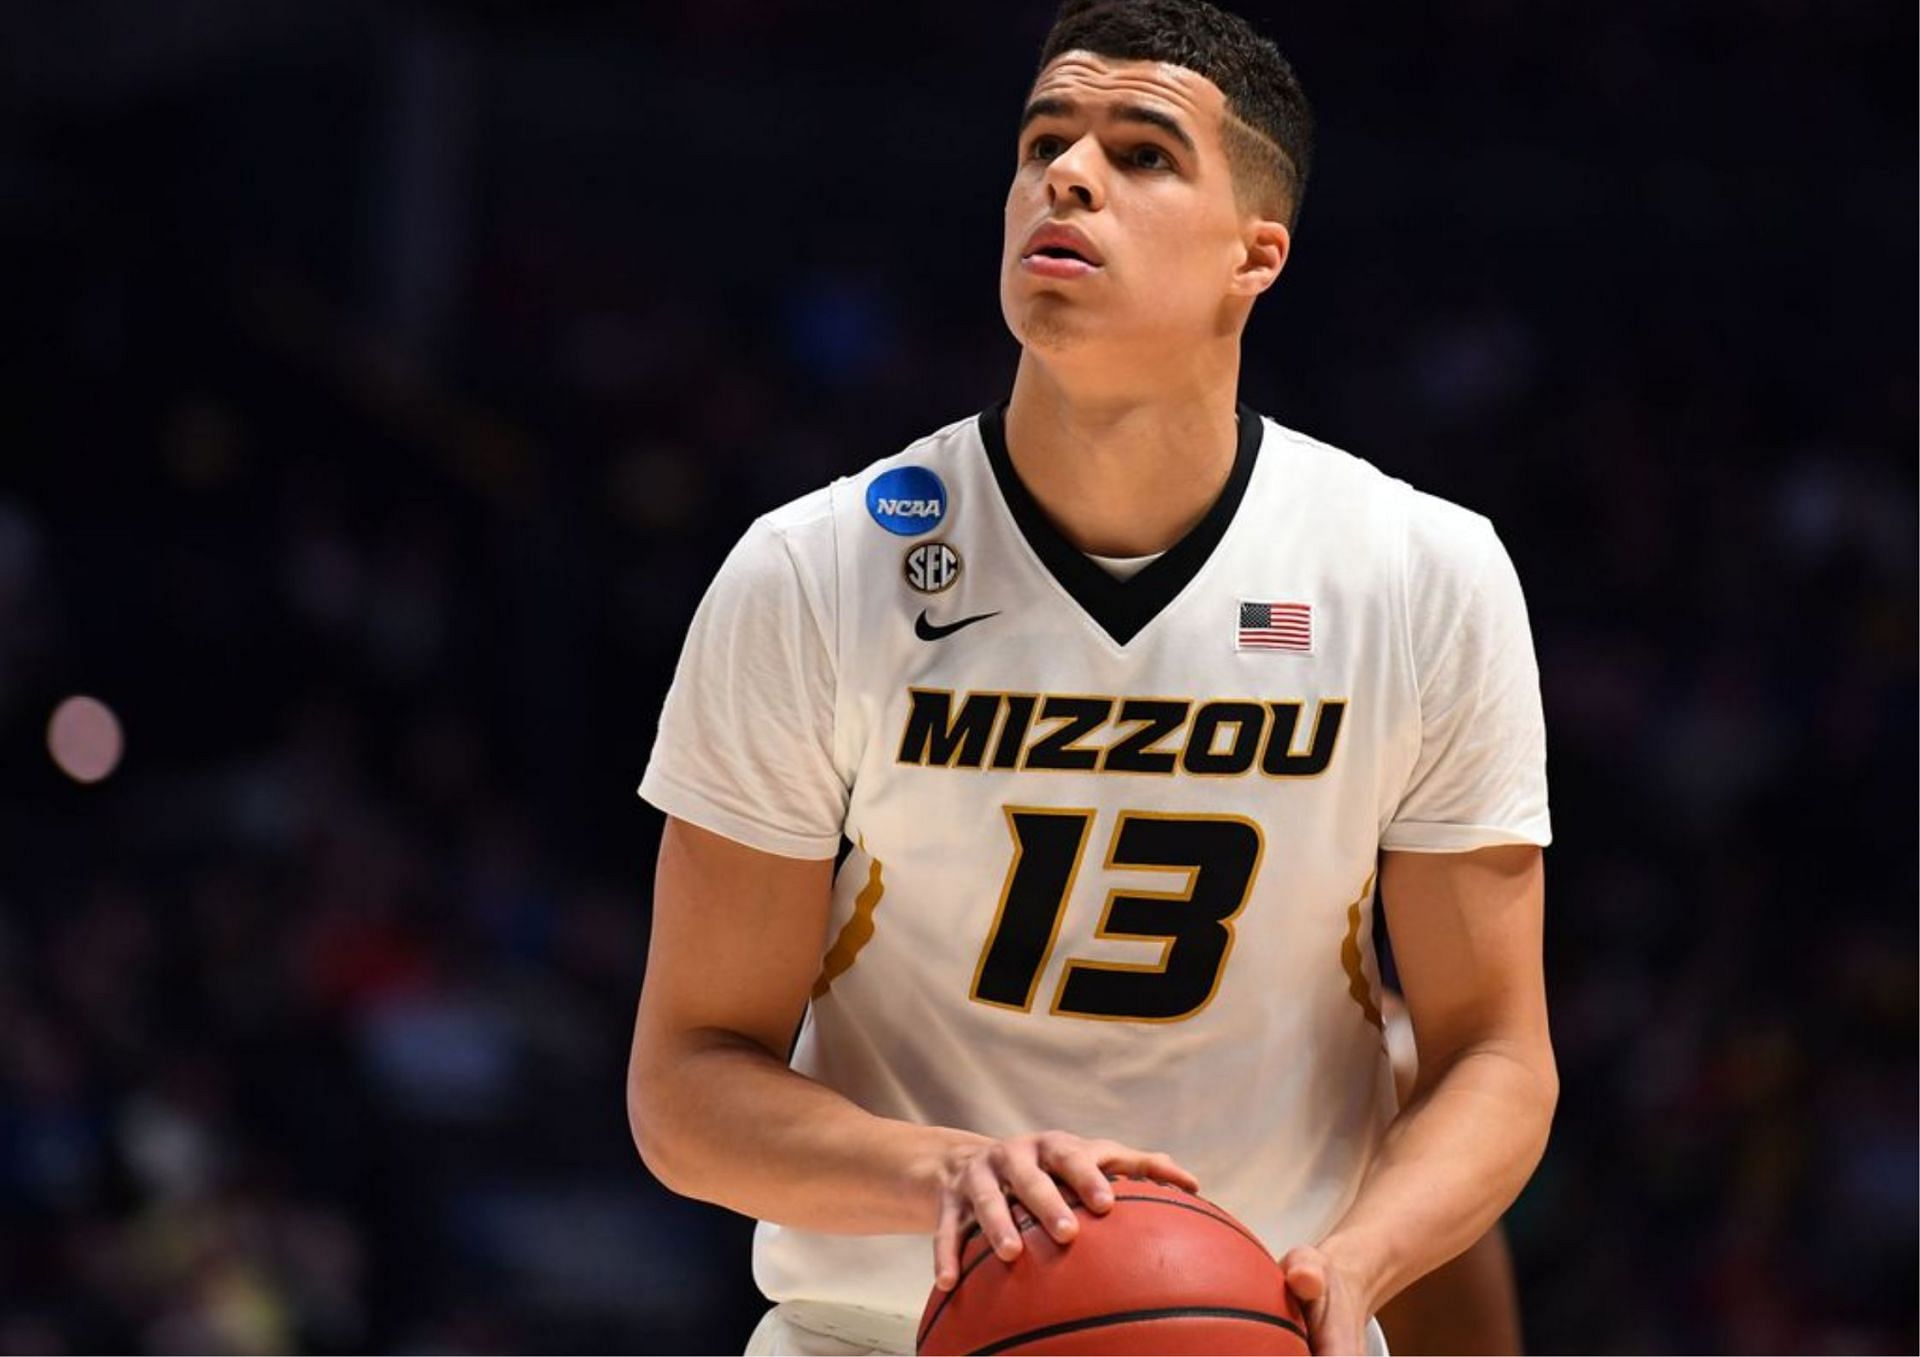 Michael Porter Jr. played just three collegiate games for the Missouri Tigers before entering the 2018 NBA draft.